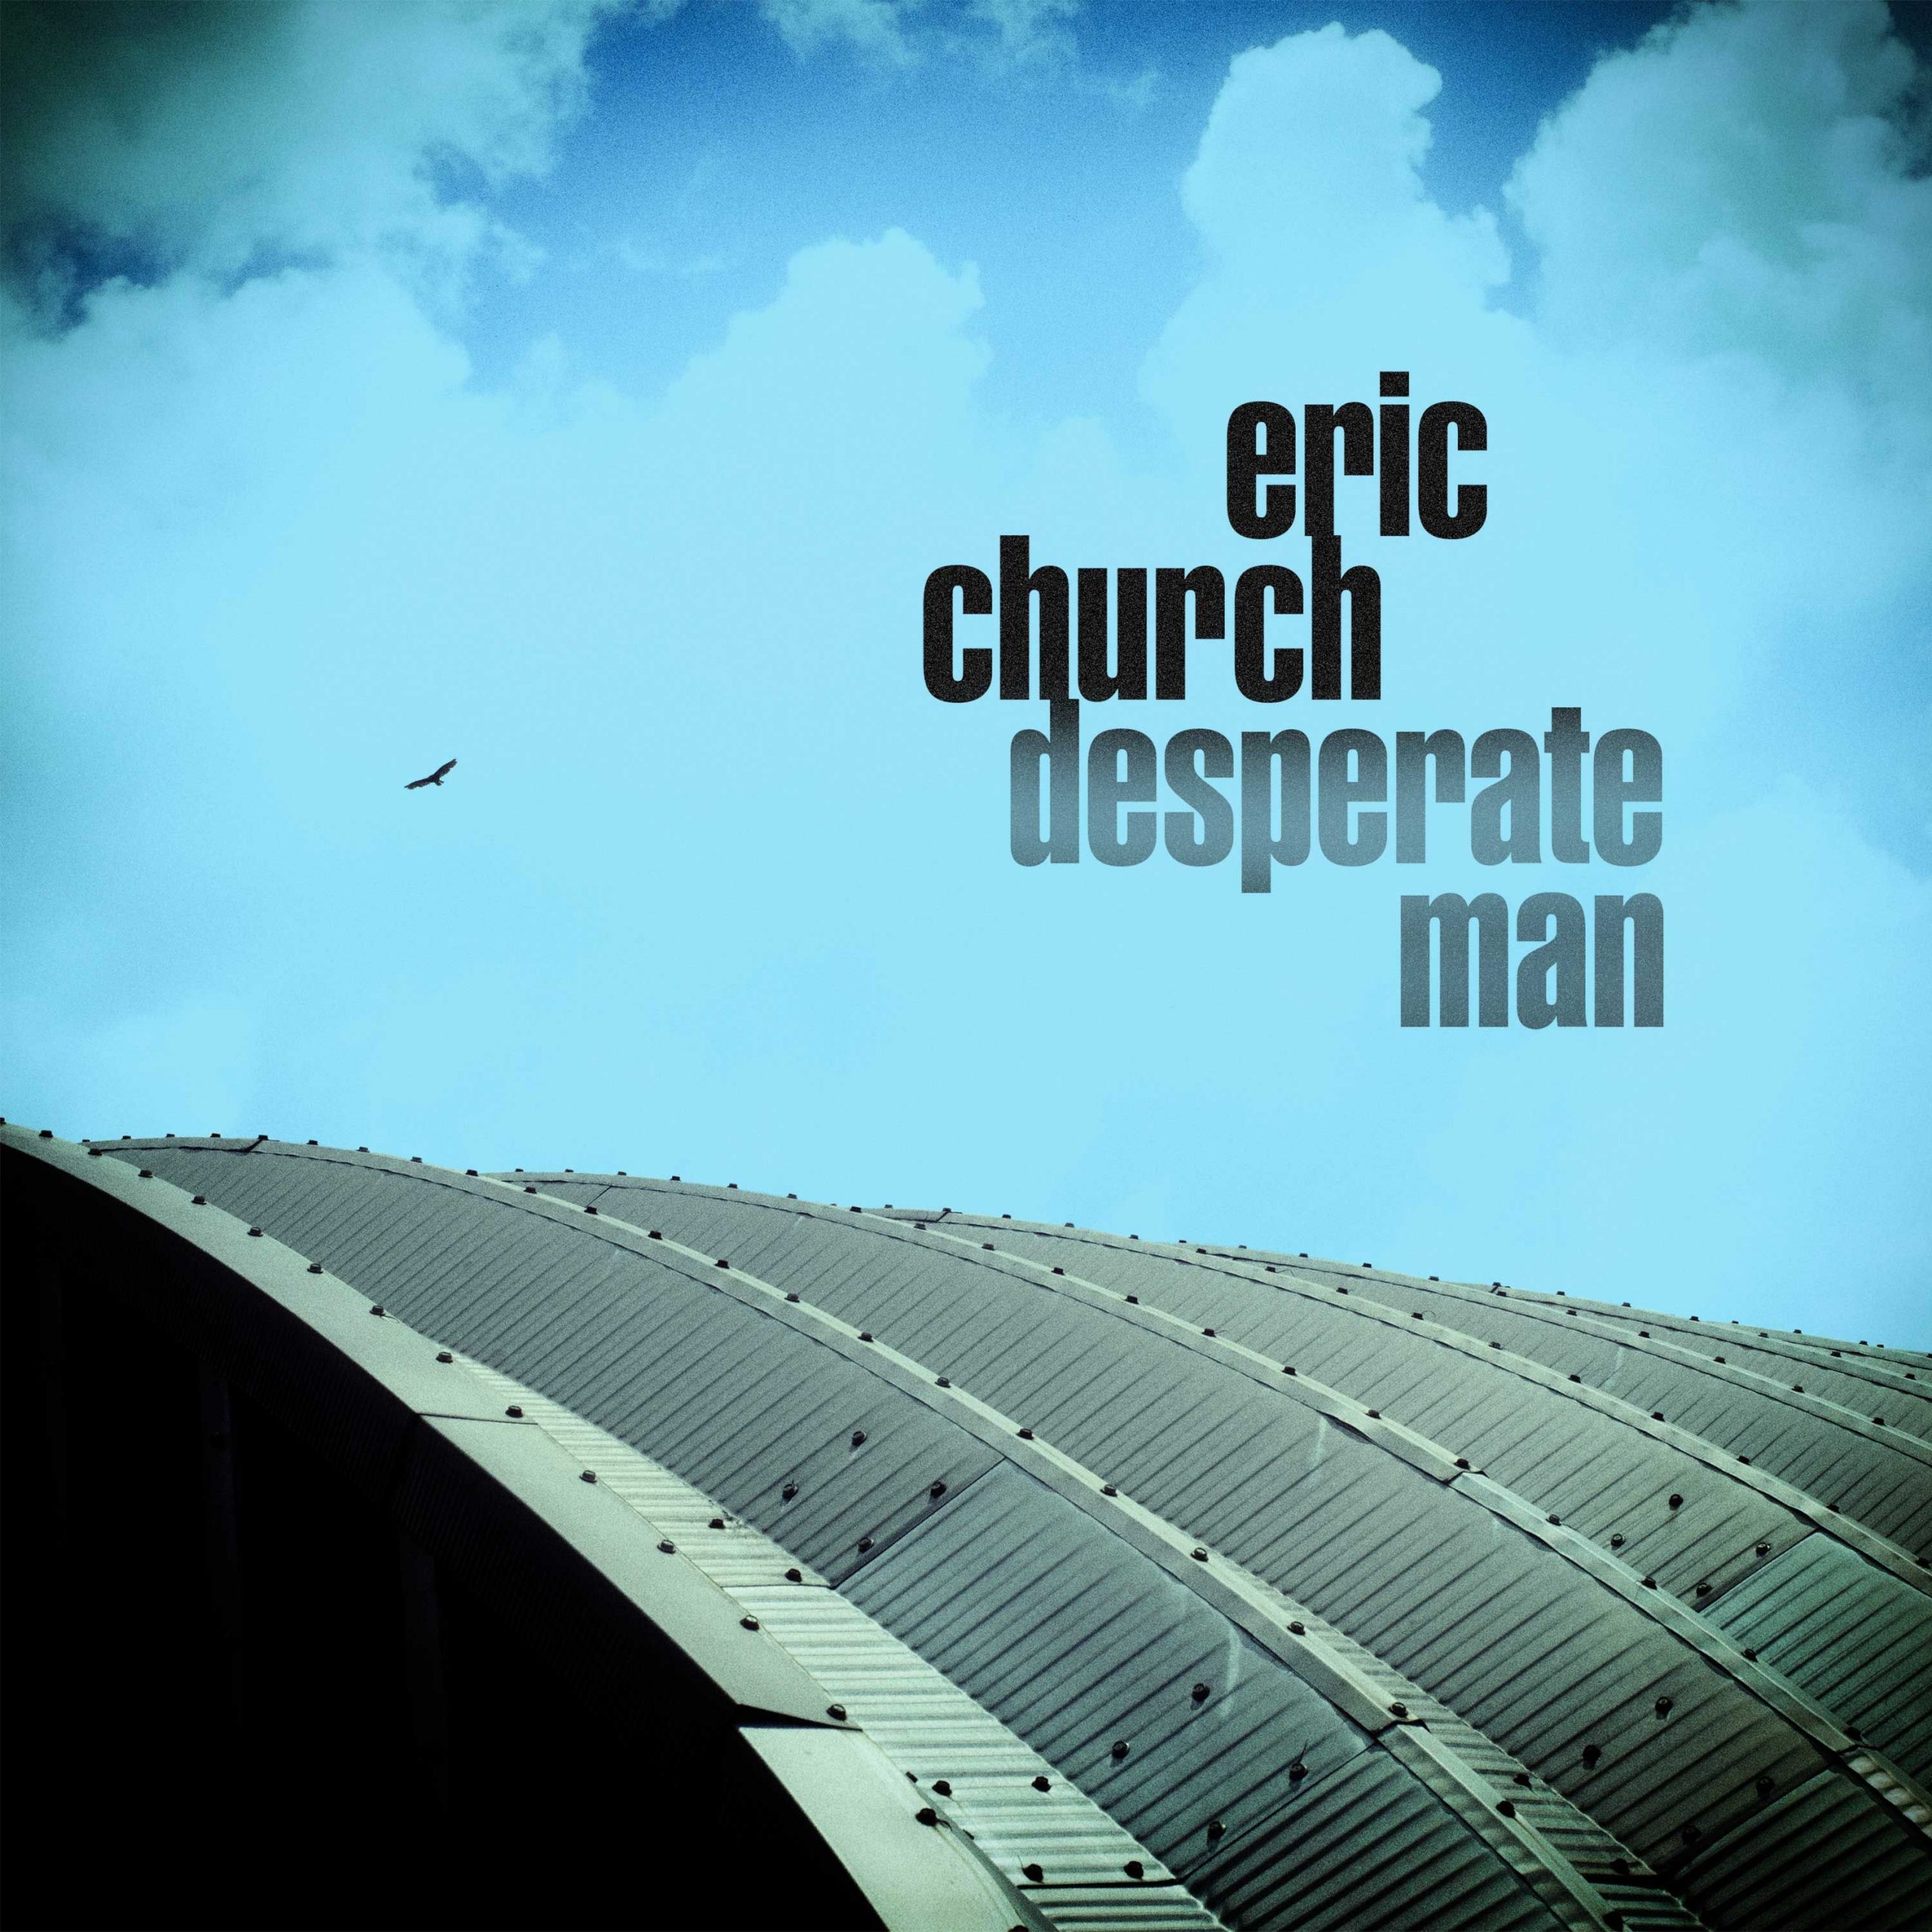 ERIC CHURCH TO FANS: THERE IS A NEW ALBUM